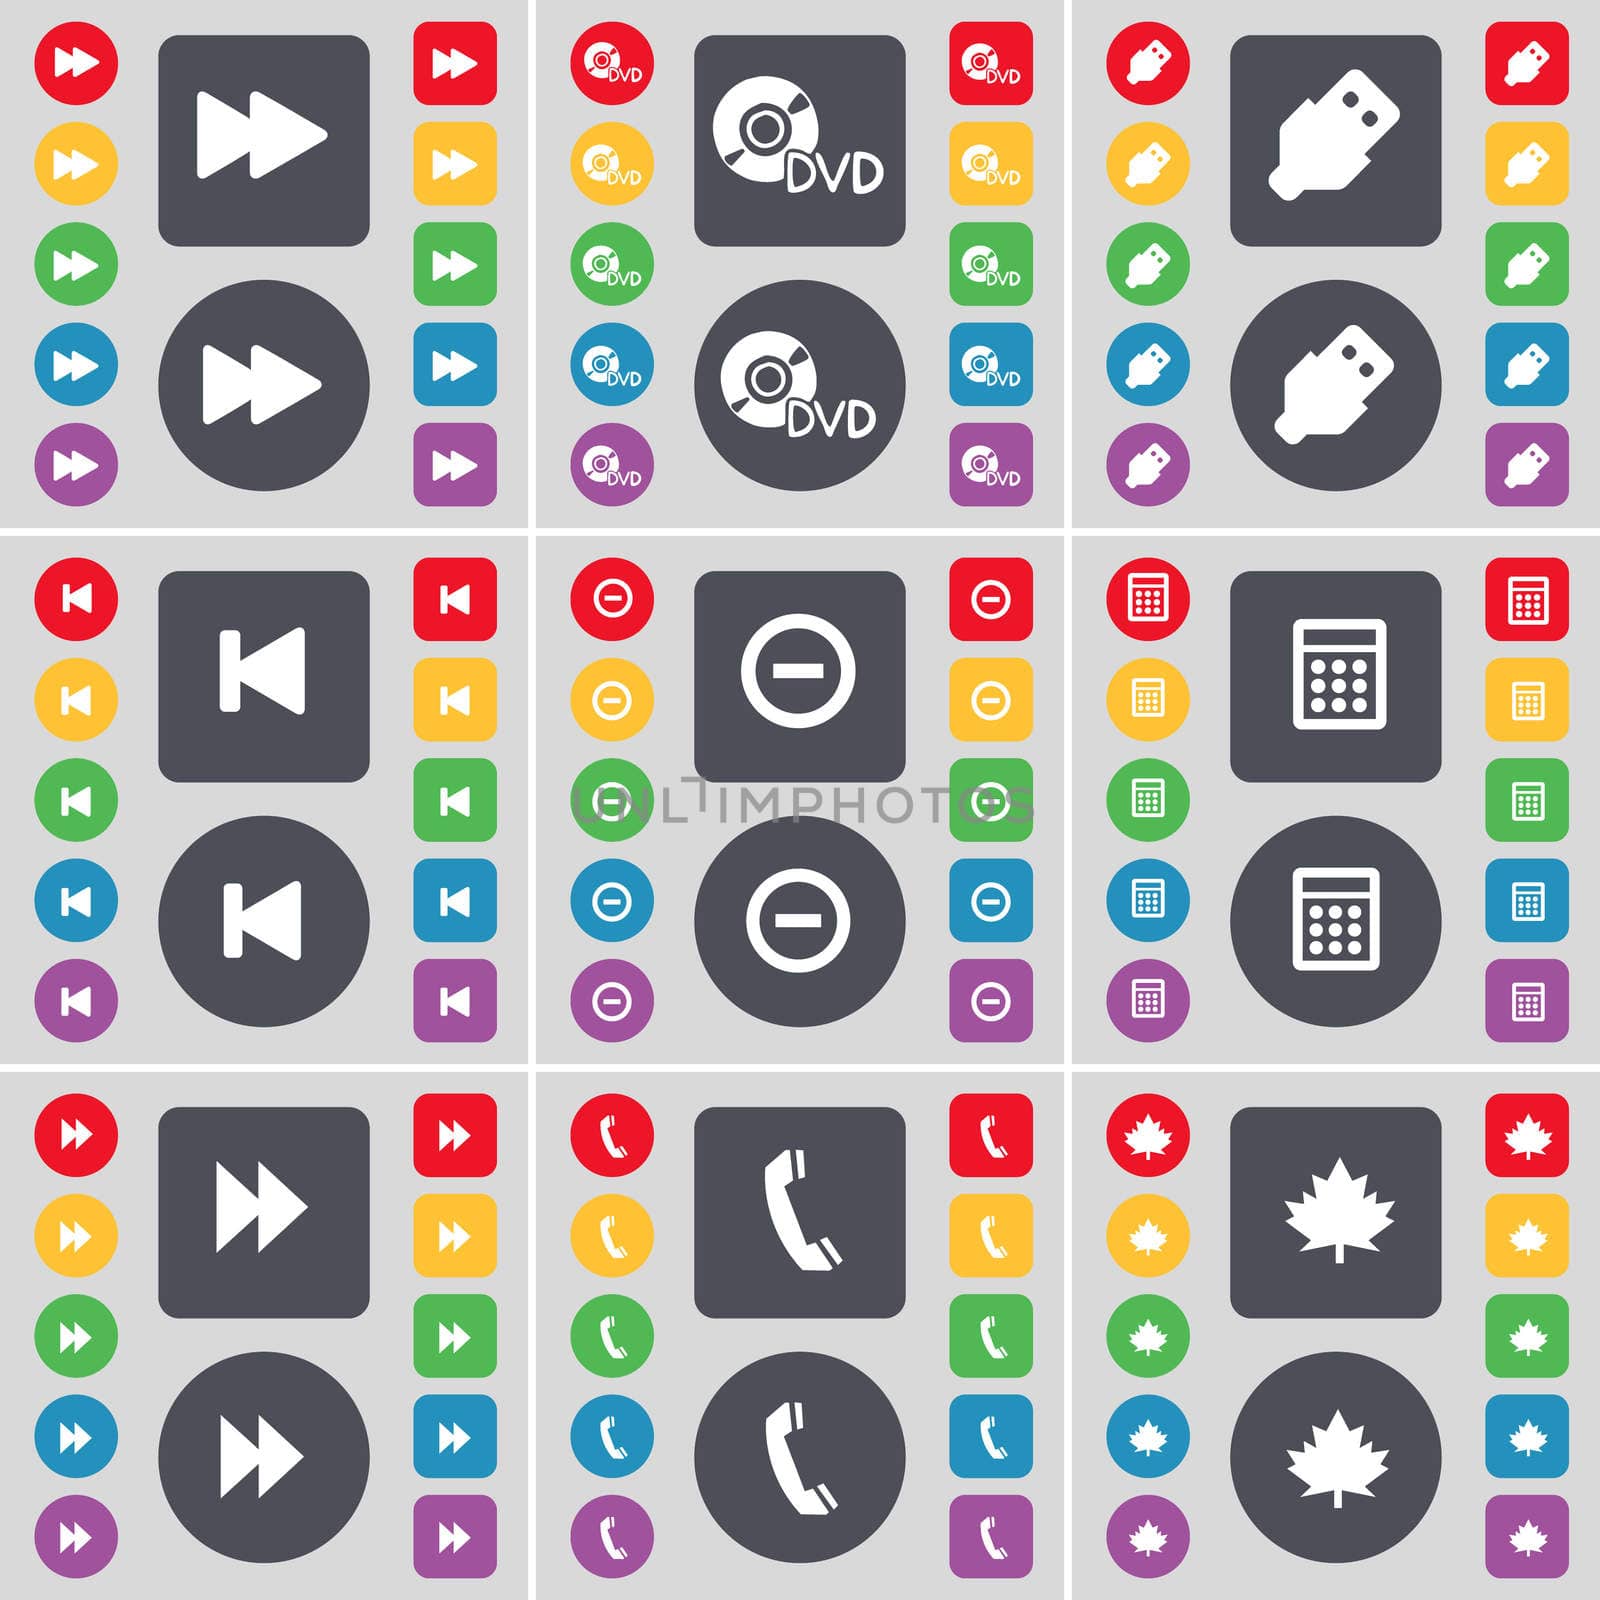 Rewind, DVD, USB, Media skip, Minus, Calculator, Rewind, Receive icon symbol. A large set of flat, colored buttons for your design.  by serhii_lohvyniuk